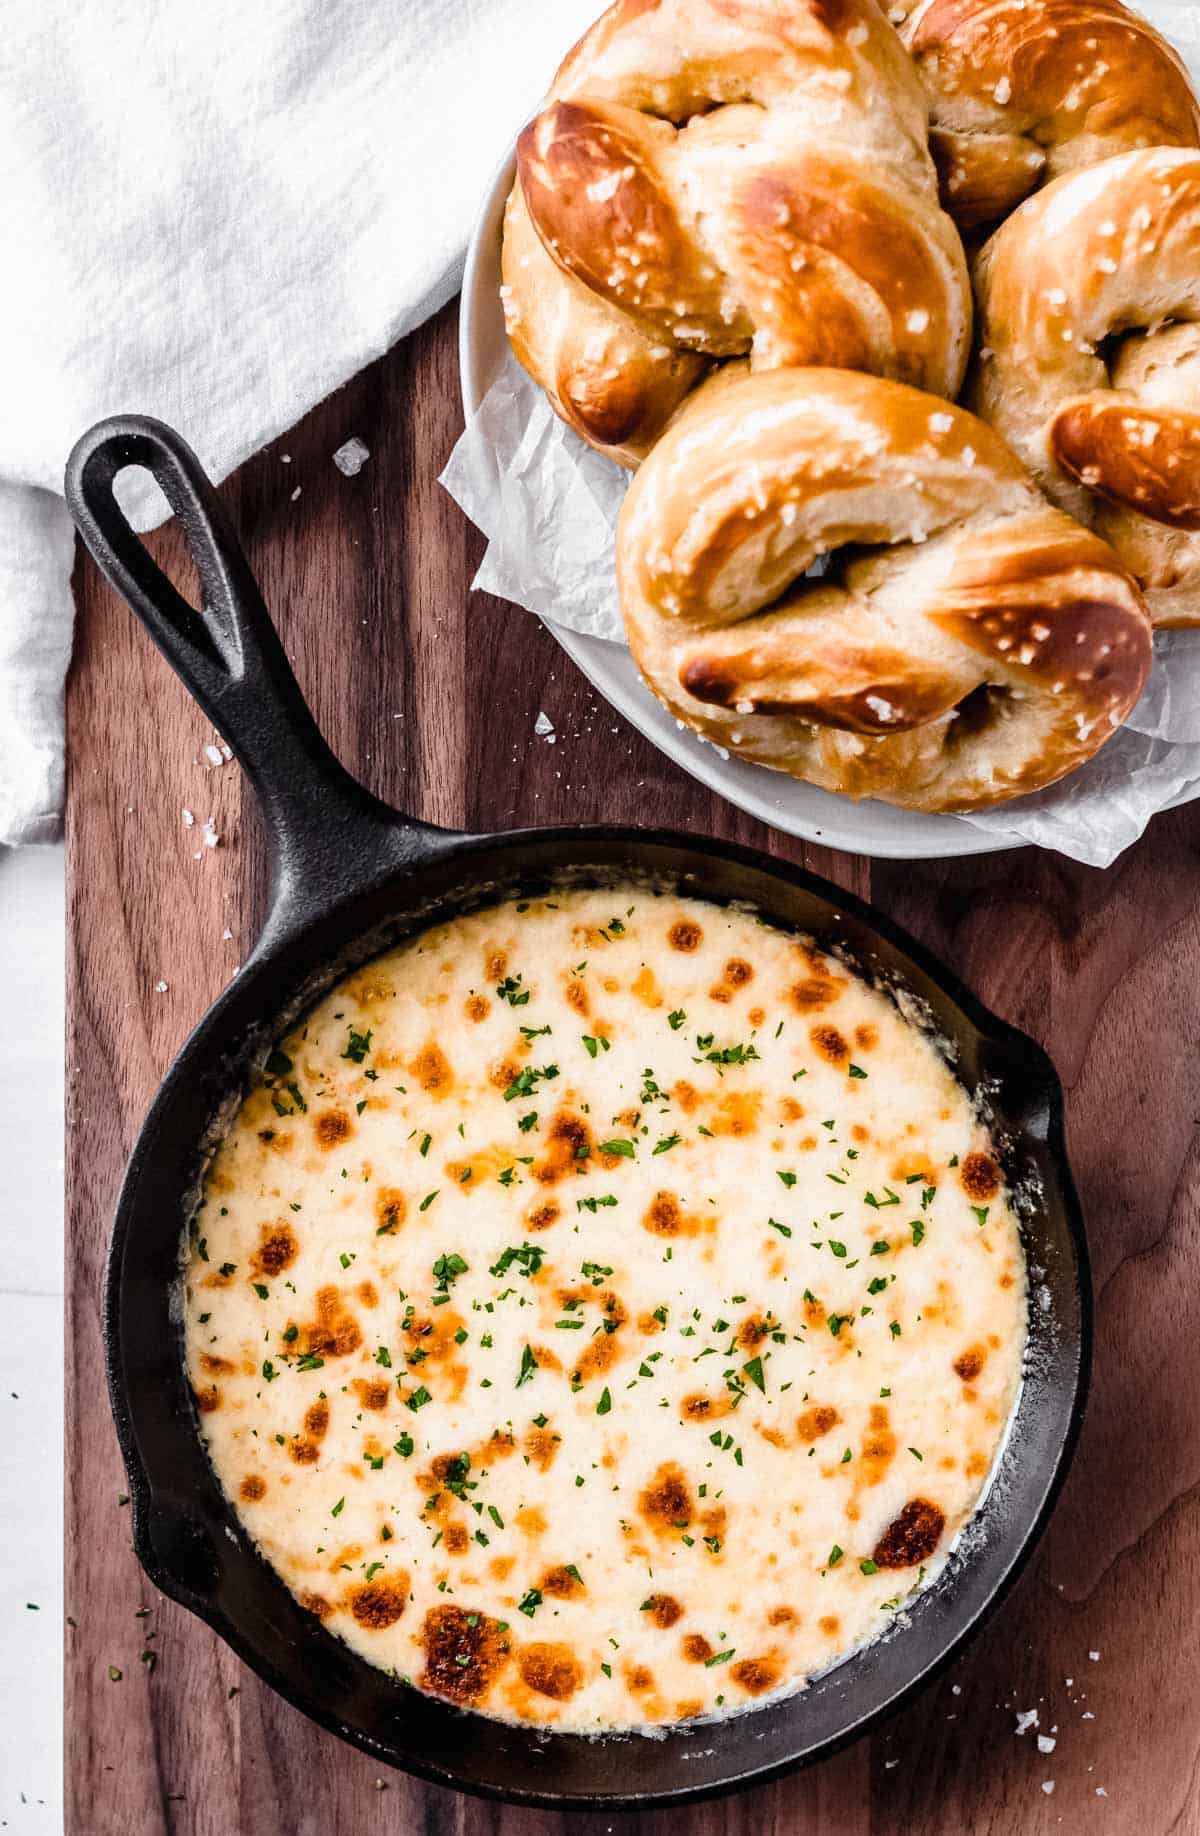 Overhead view of creamy white cheddar beer cheese dip in a black cast iron pan on a wood background with a plate of soft pretzels and a white towel behind it